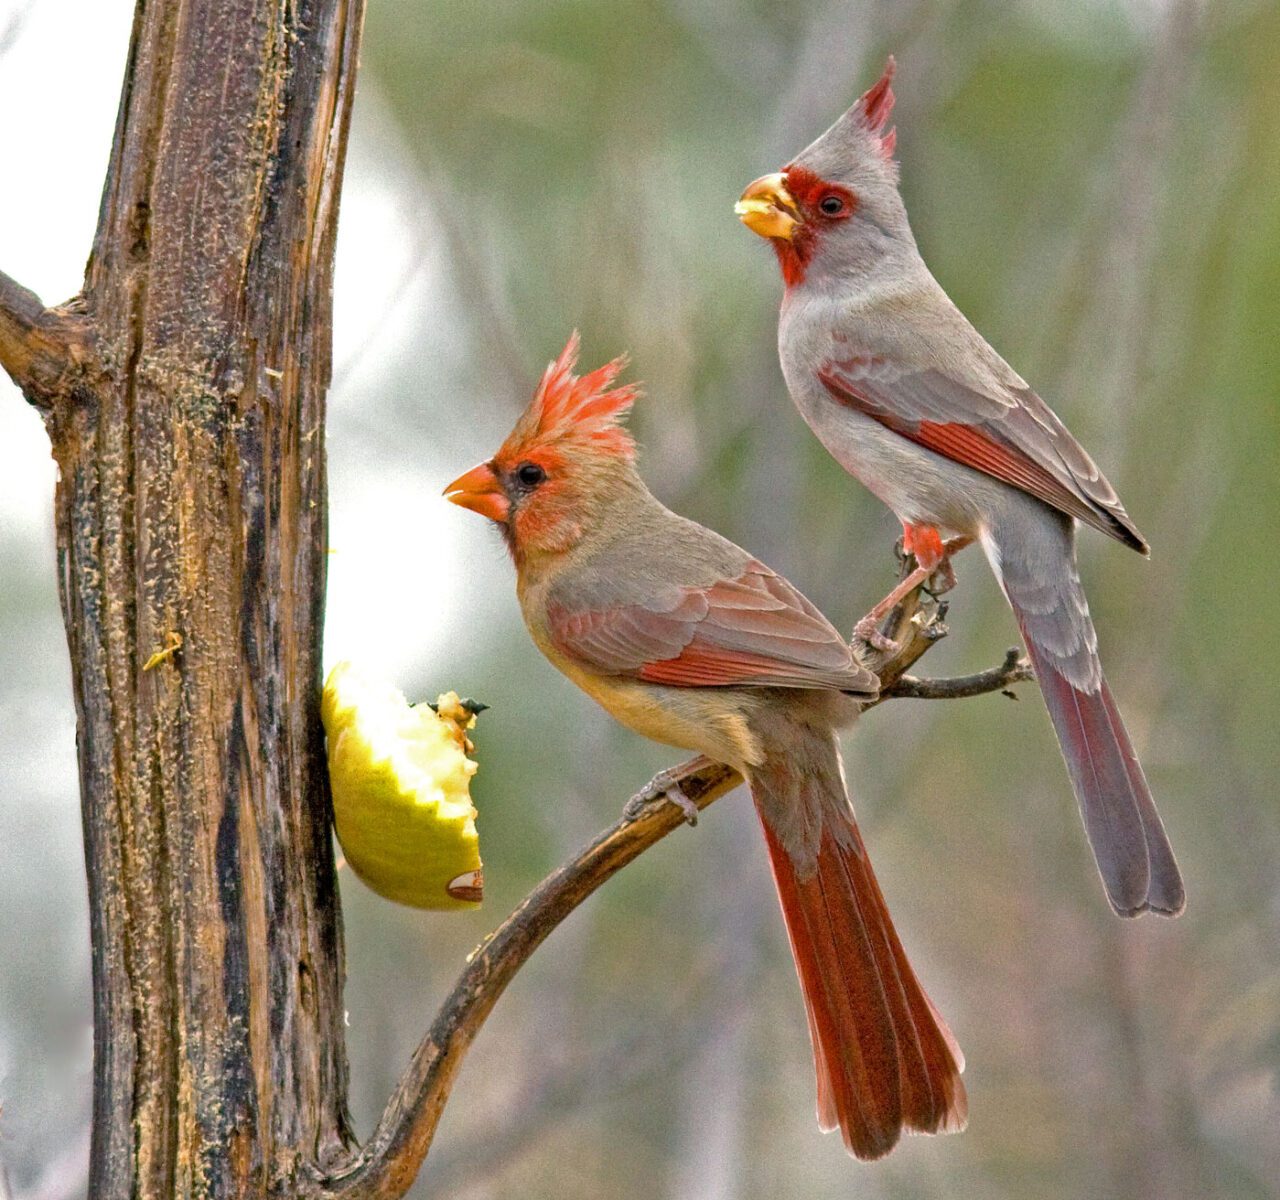 two crested birds perch on a branch and eat an apple